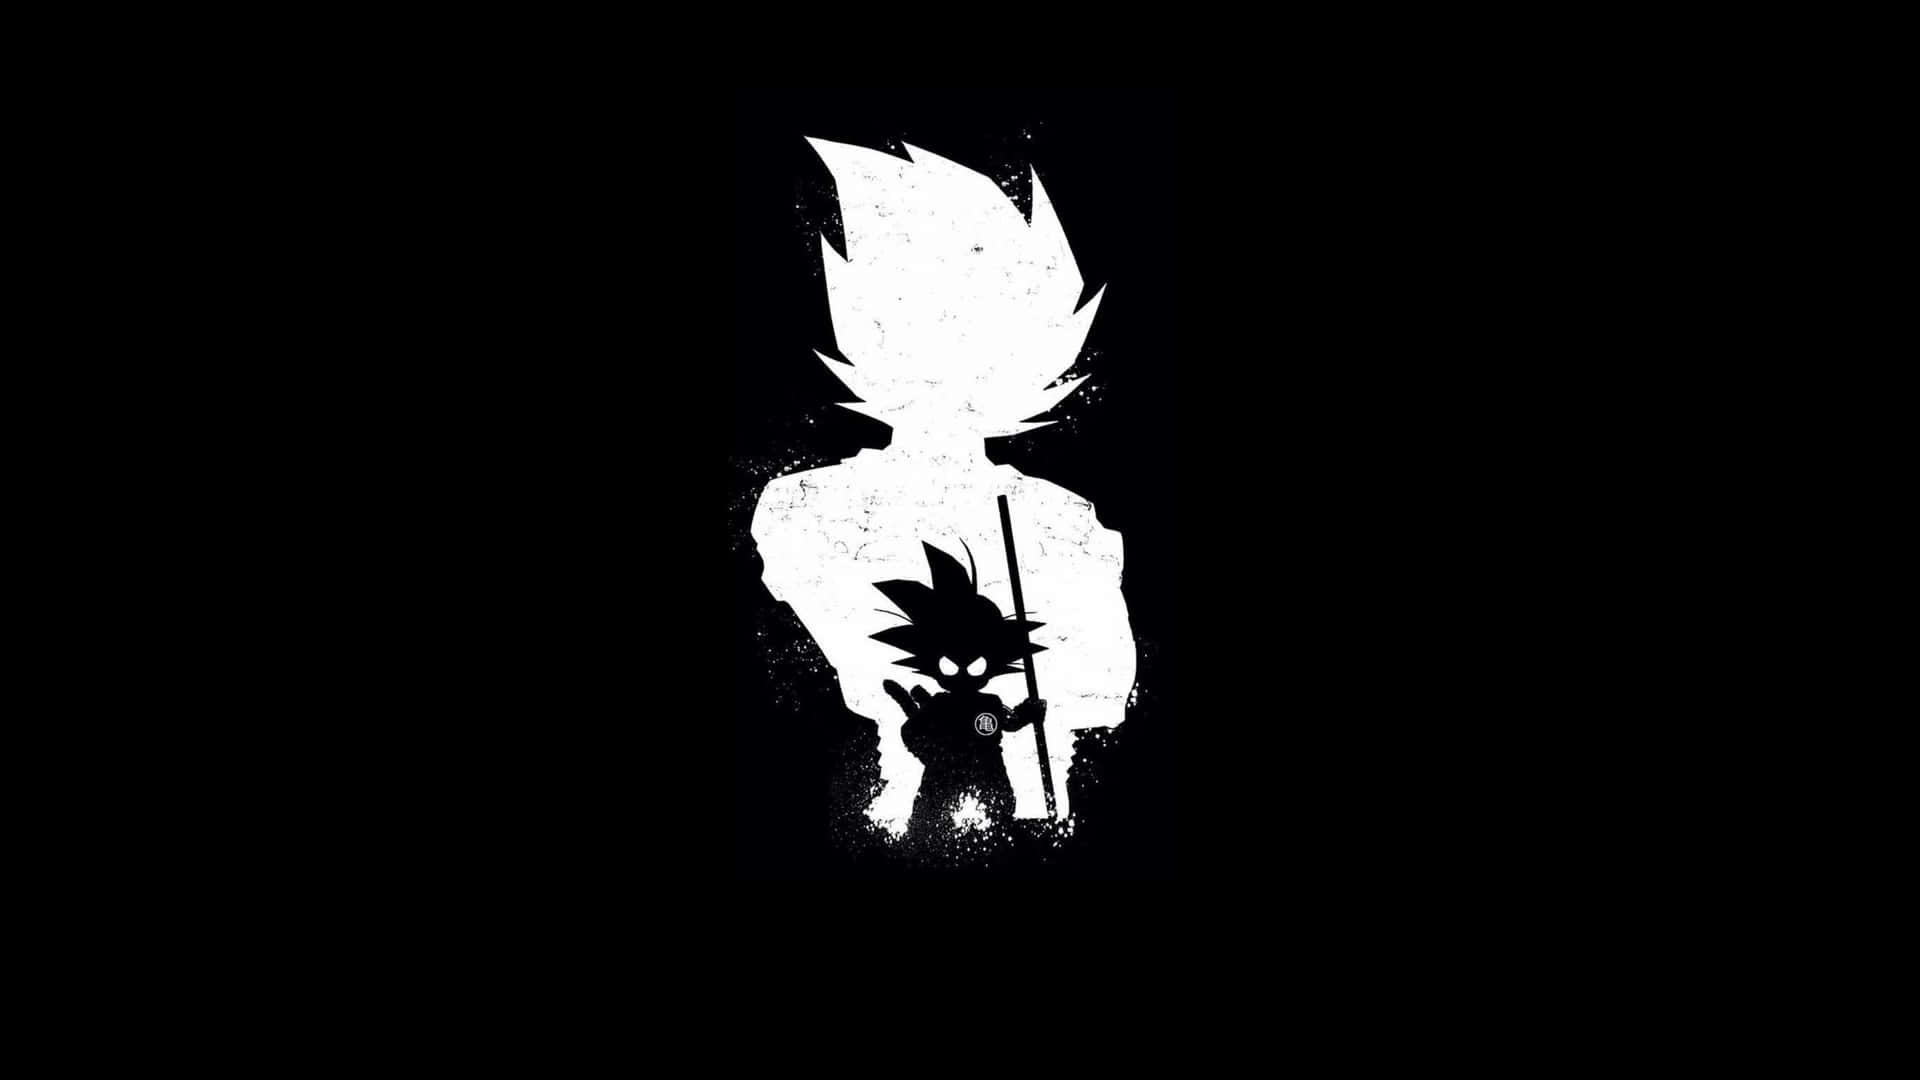 Exciting Action of Dragon Ball Black and White Wallpaper